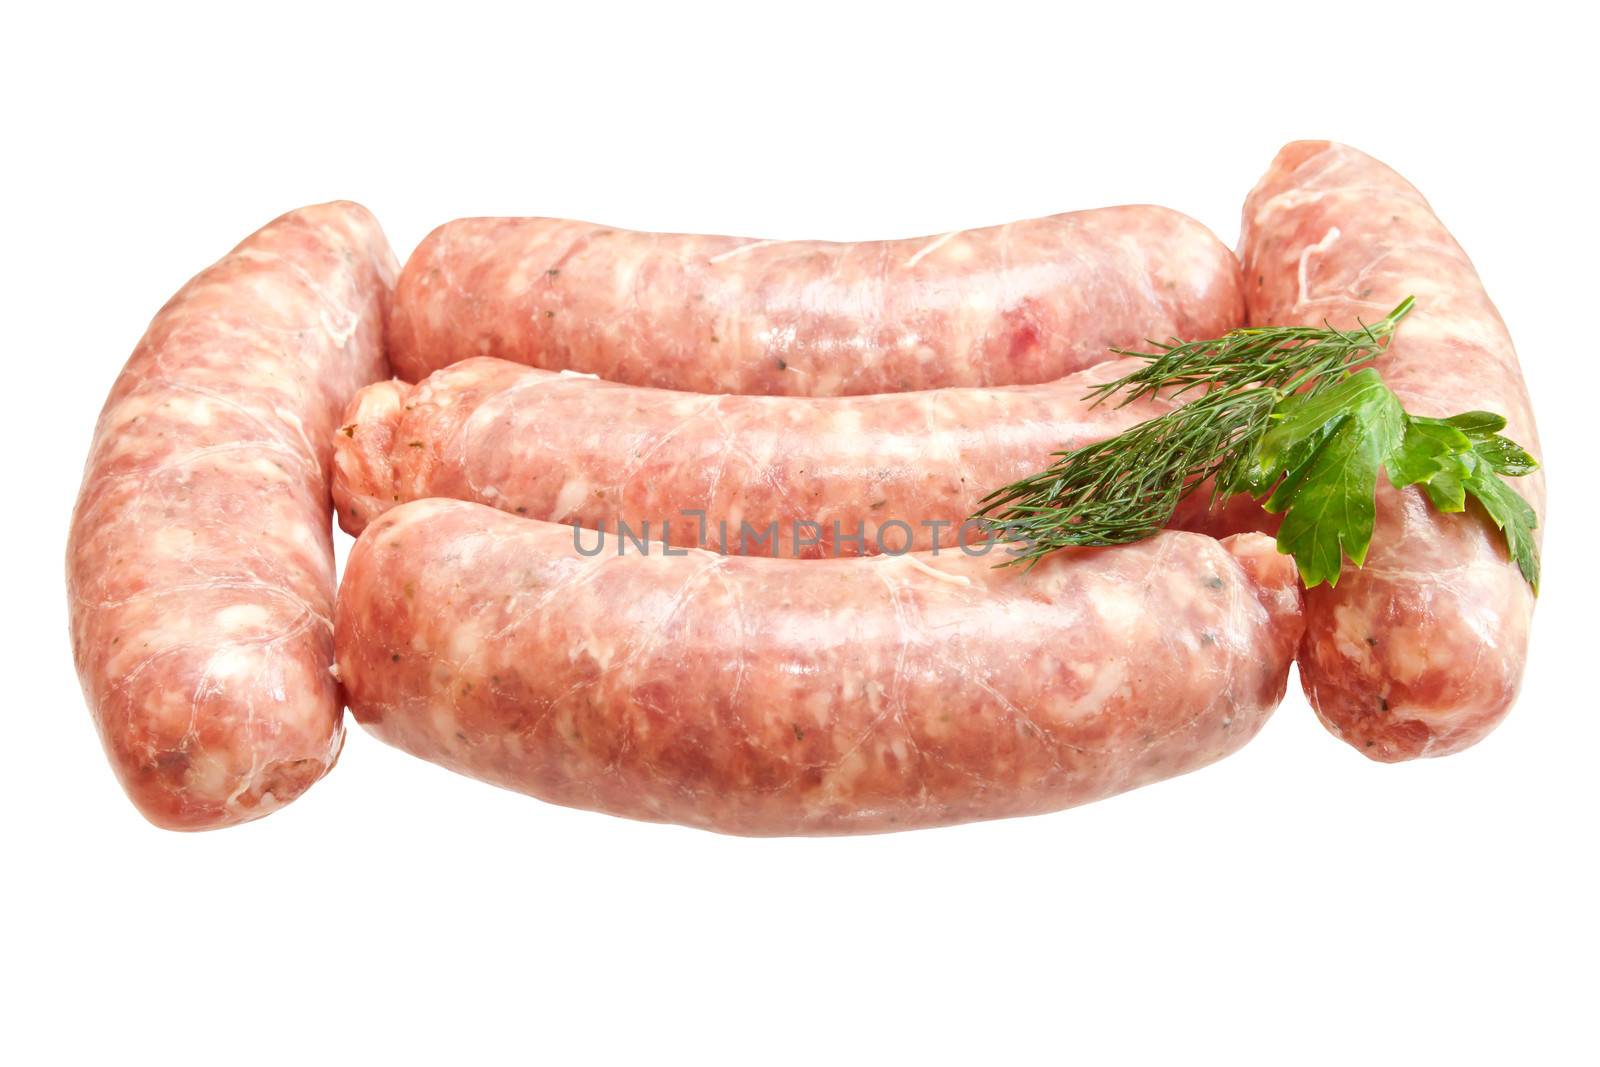 Raw meat sausages with greens isolated on white background by evp82